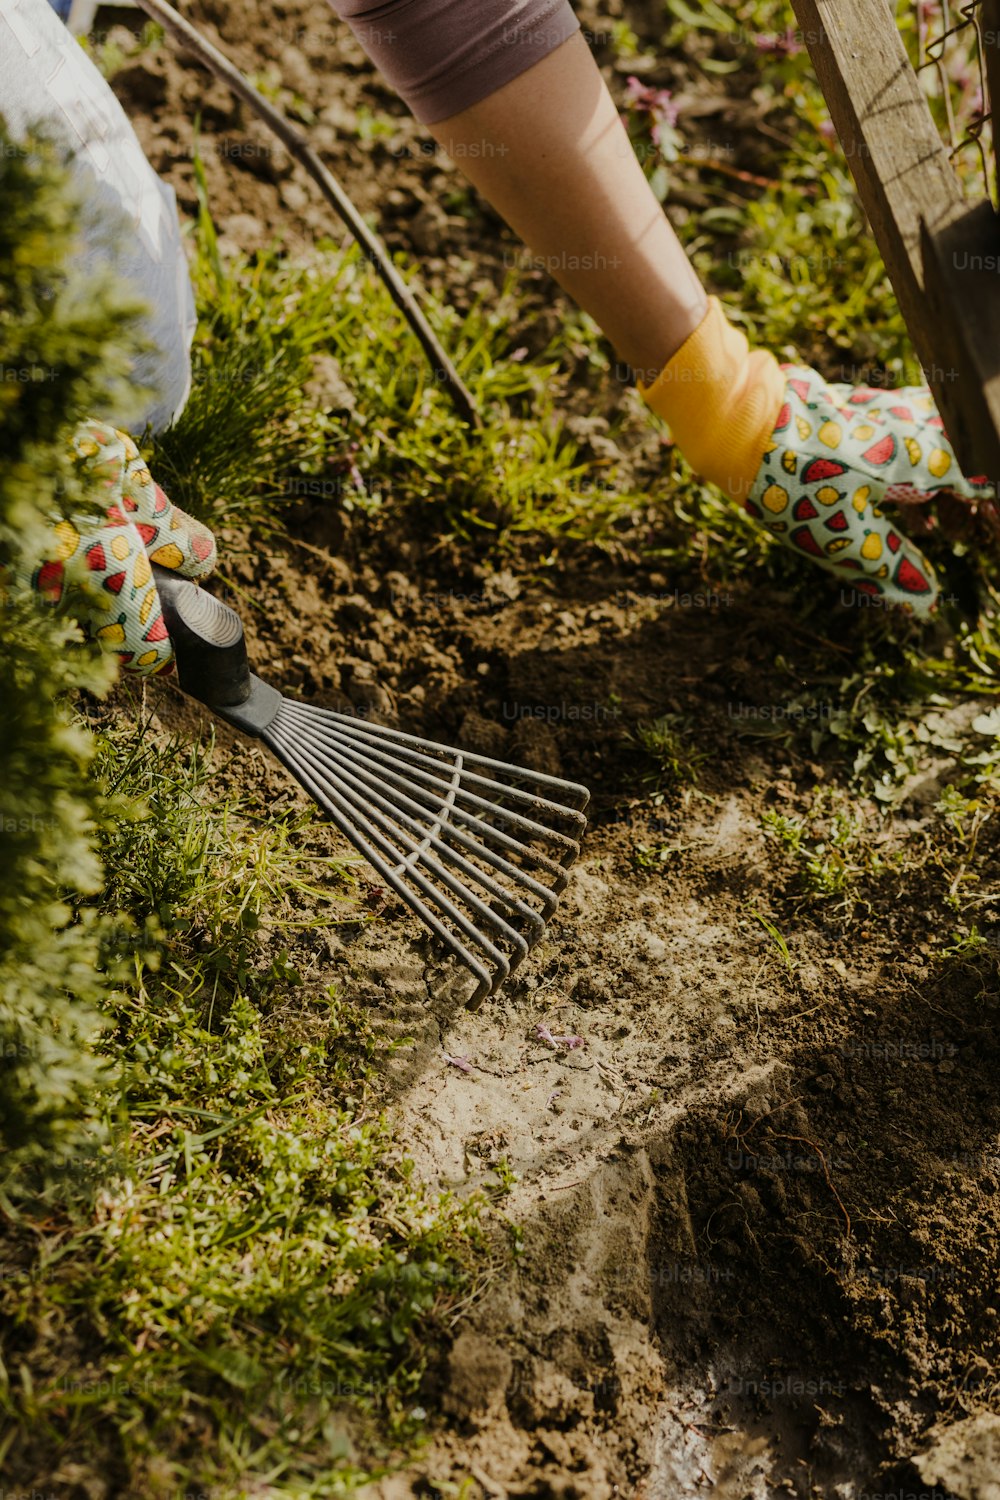 a person is digging in the dirt with a rake